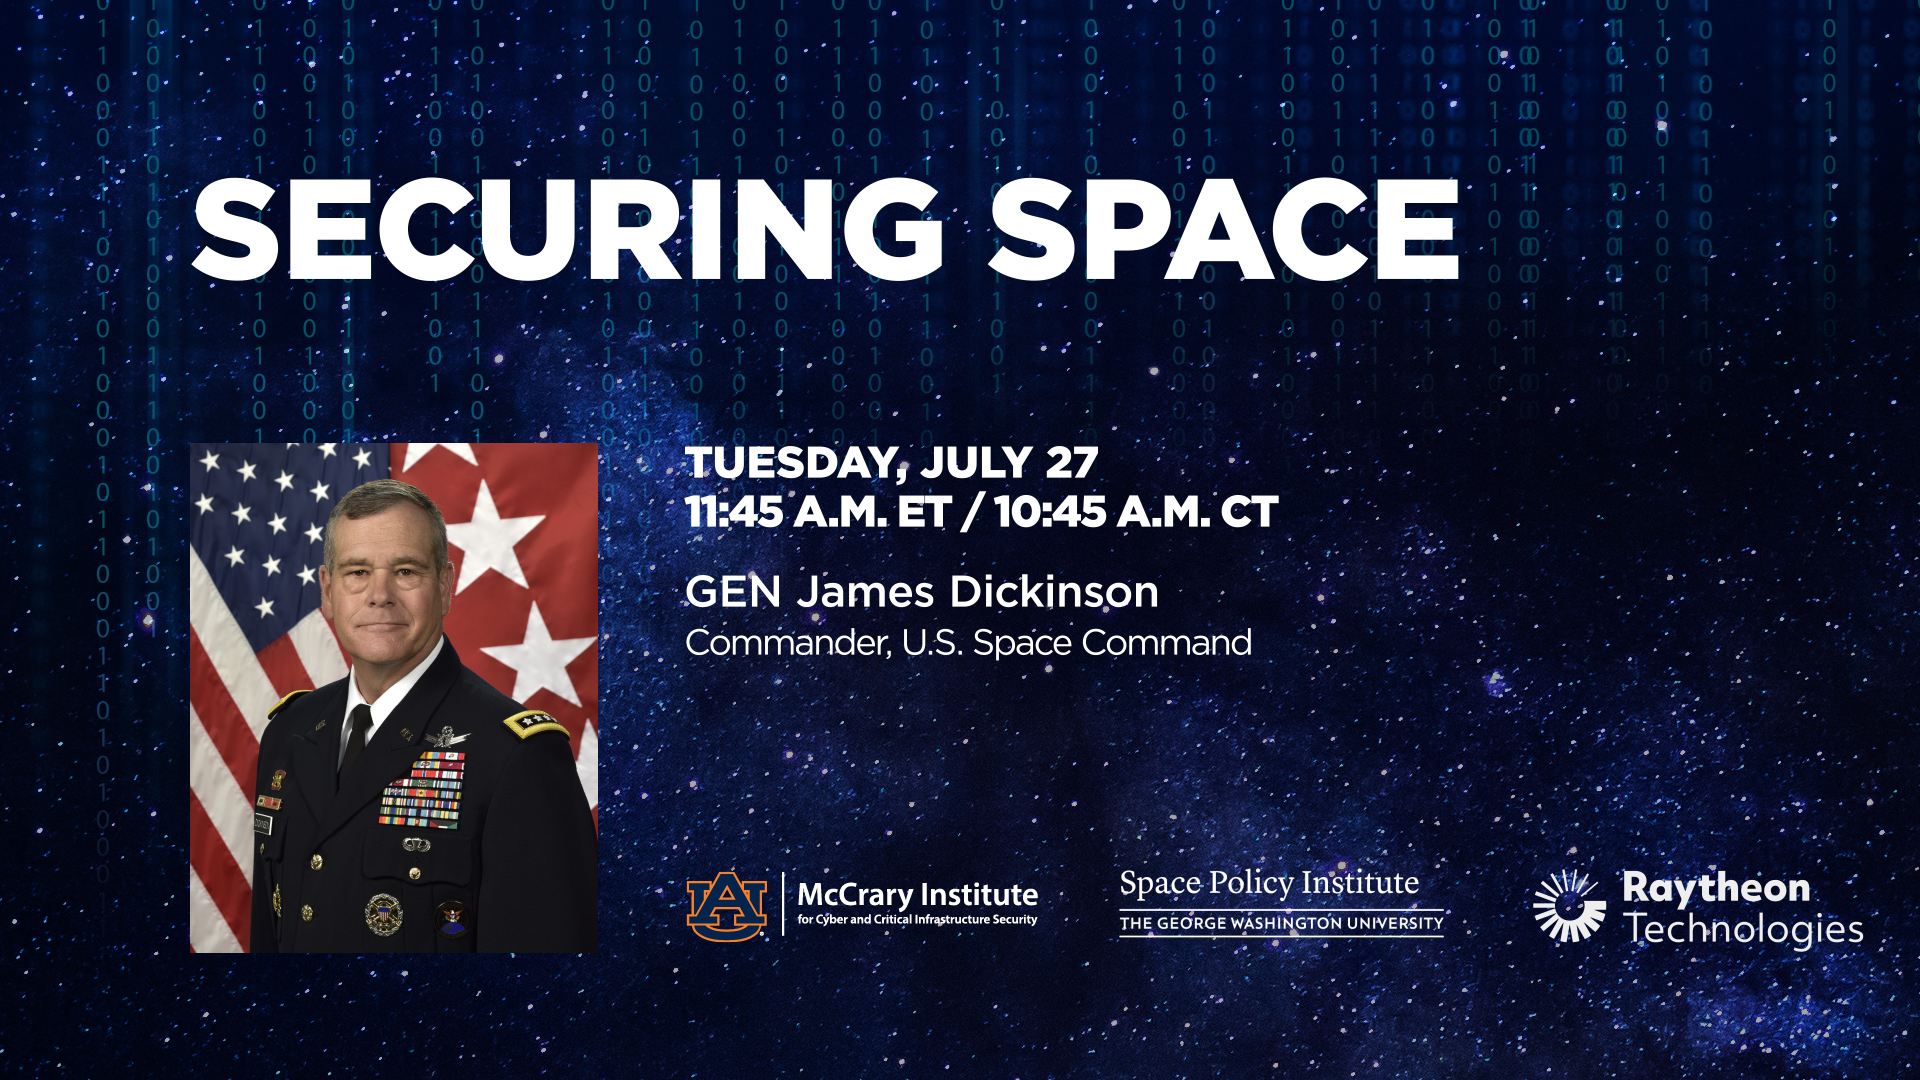 Securing Space, General James Dickinson, Commander, U.S. Space Command, McCrary Institute Cybersecurity, Critical Infrastructure